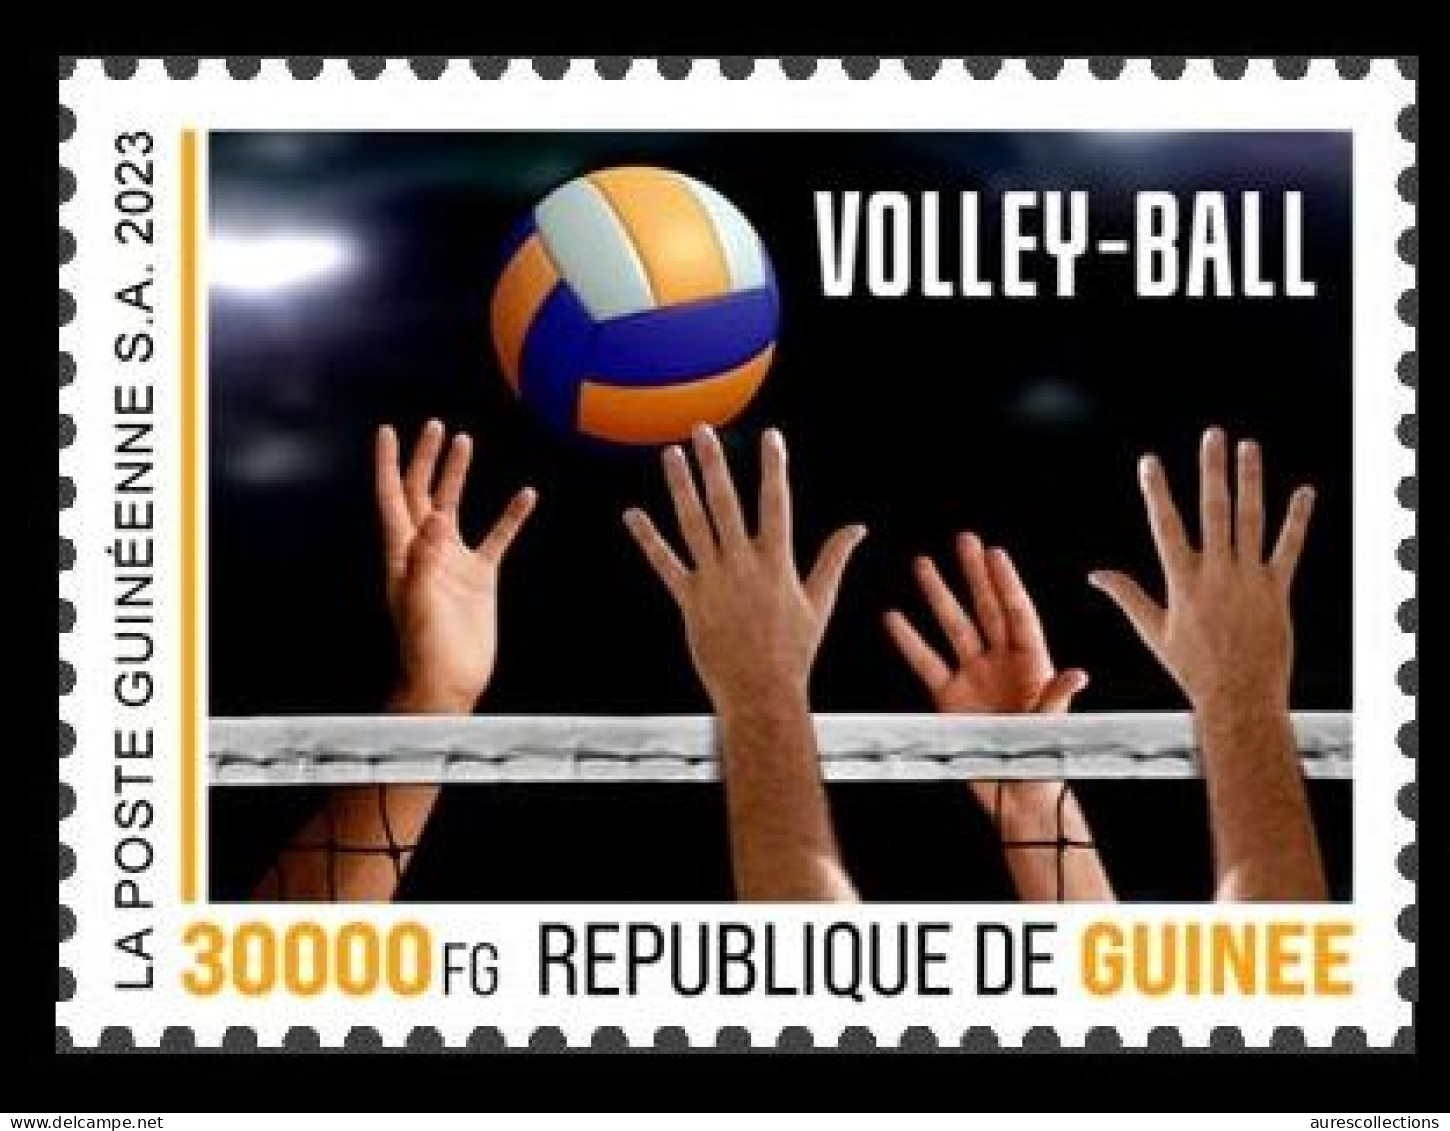 GUINEA 2023 STAMP 1V - OLYMPIC GAMES PARIS FRANCE 2024 - VOLLEY BALL VOLLEYBALL - MNH - Voleibol